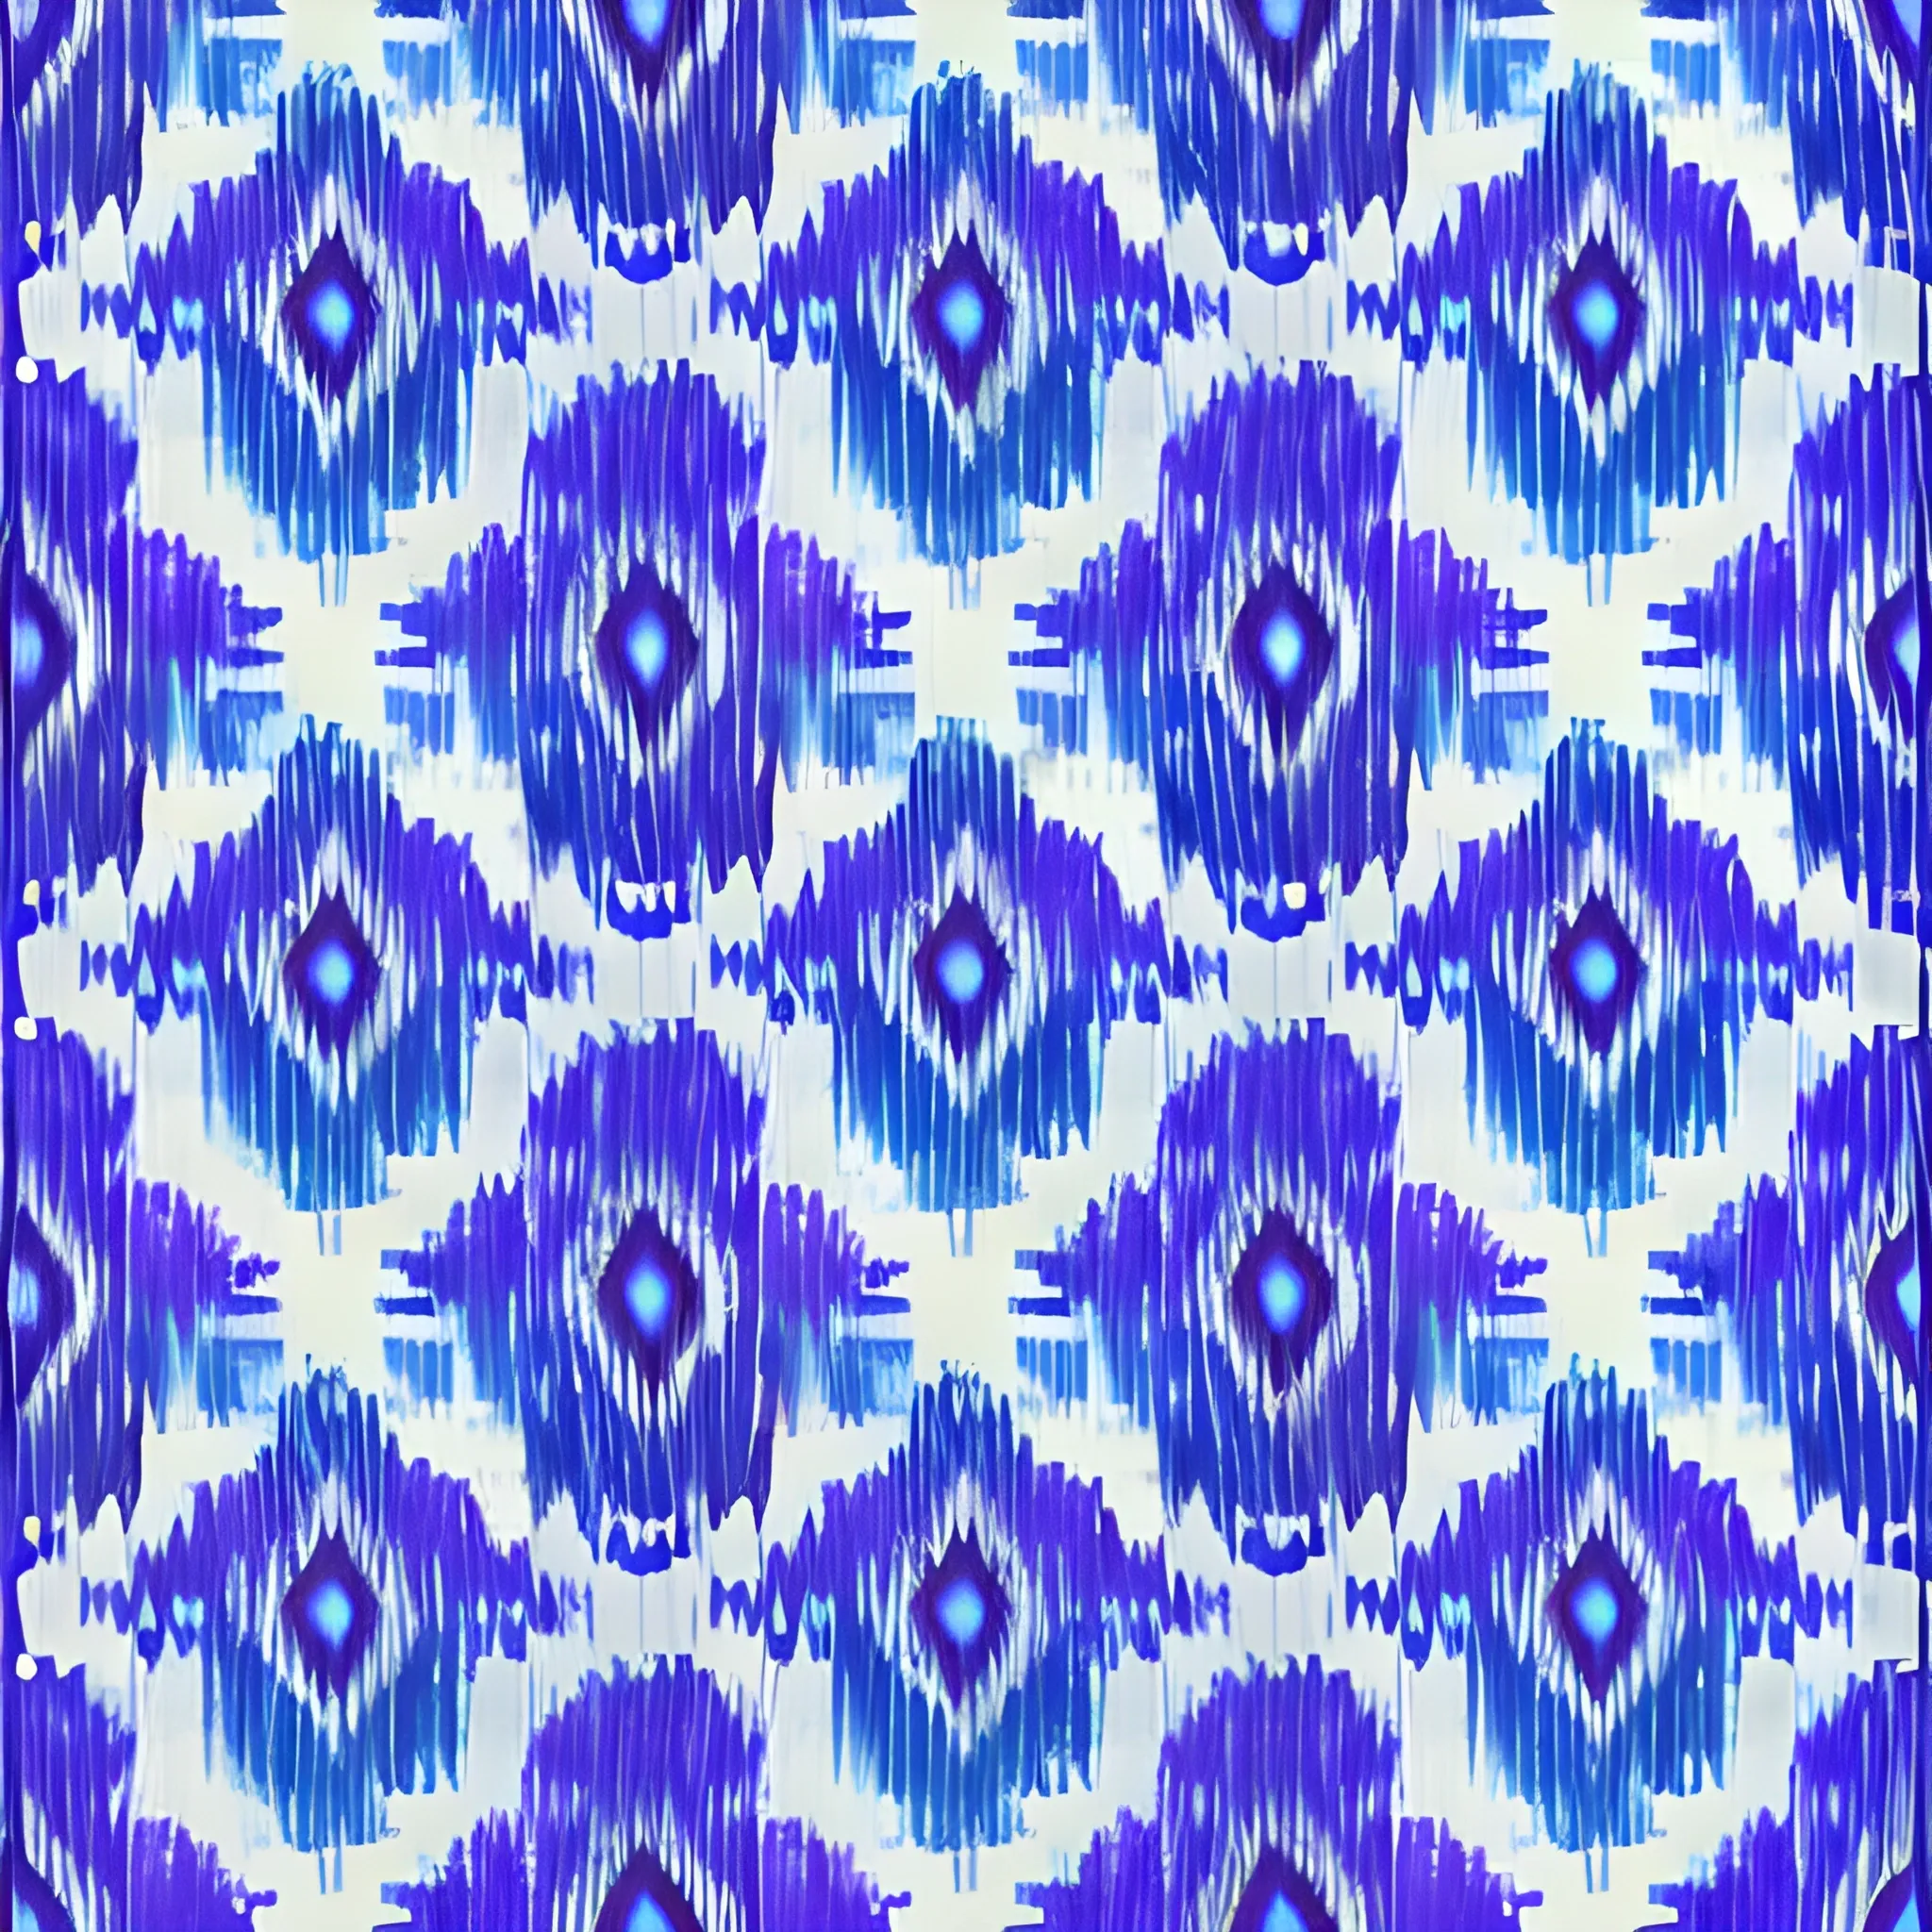 weft ikat motif designs blue purple colour, abstract designs that look like water ripple effect, bigger motifs, unique abstract design.
